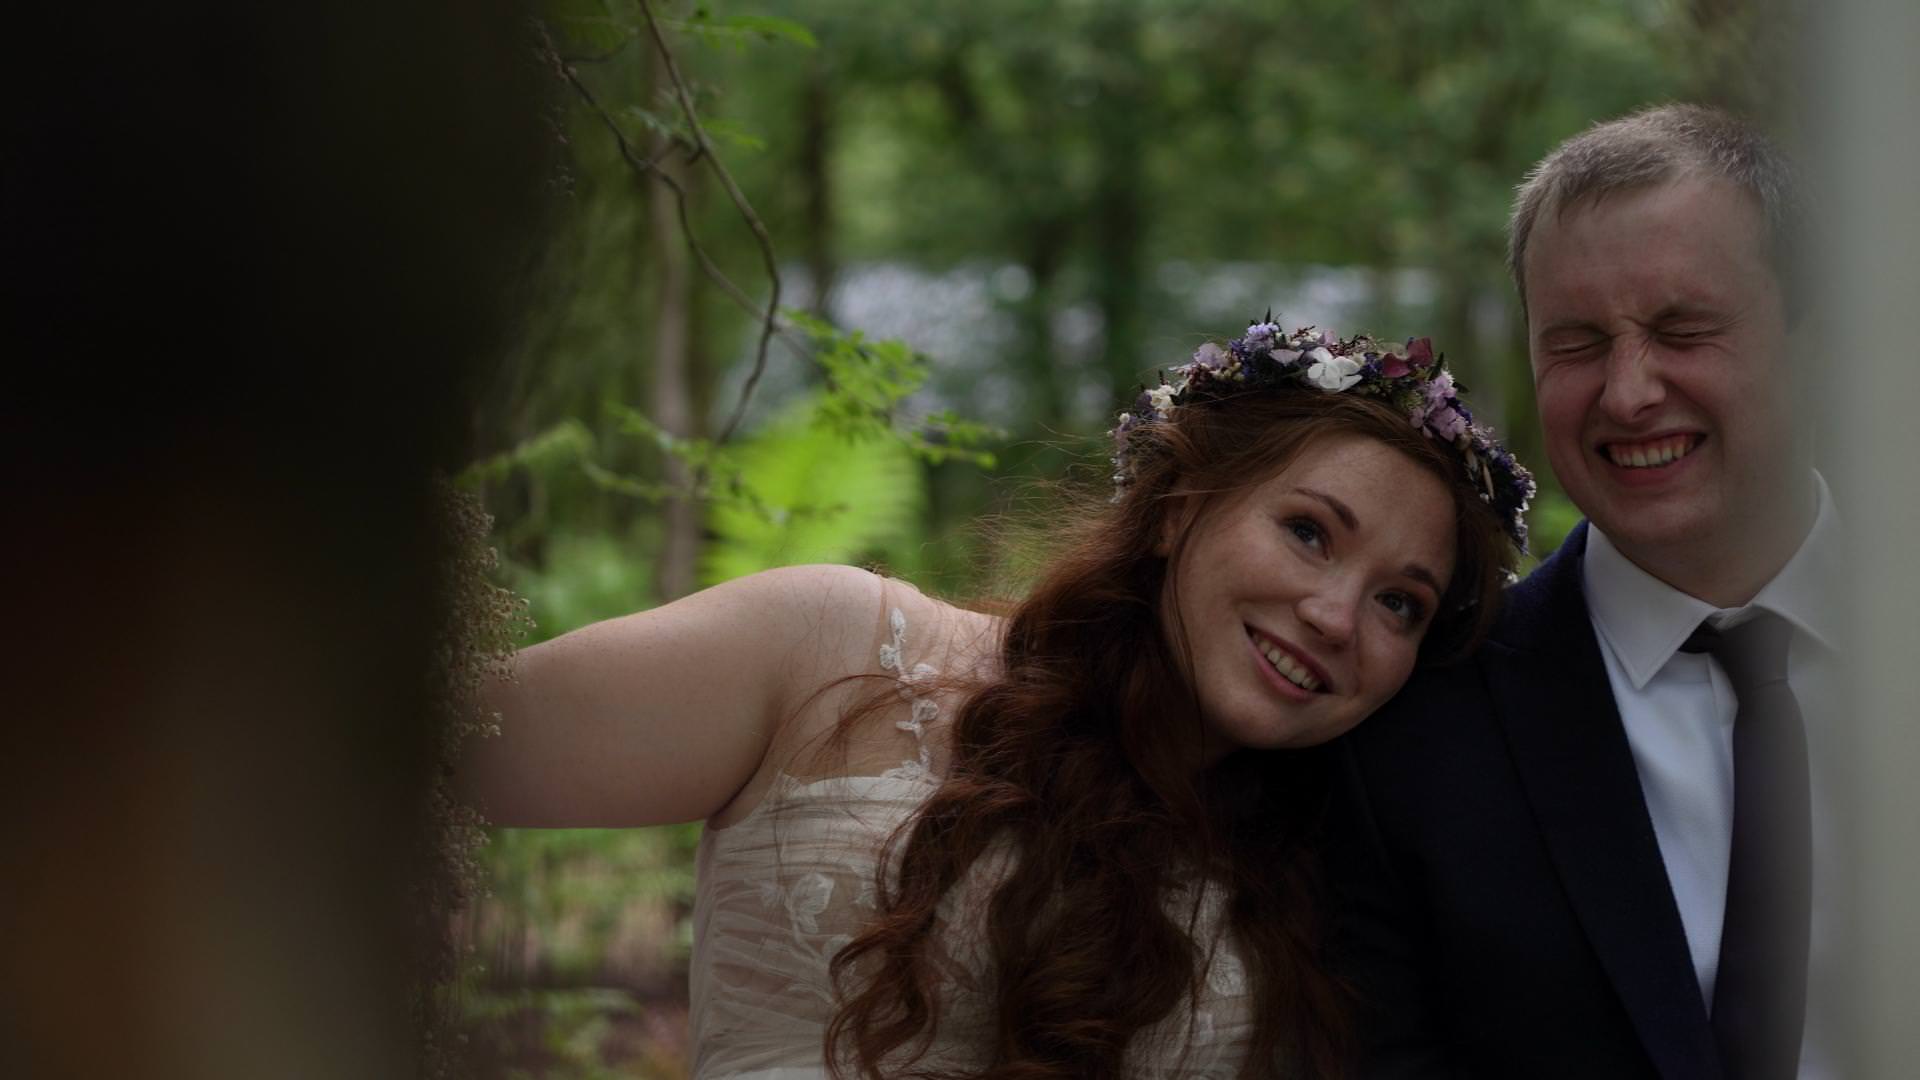 couple pose for wedding photographer in woodlands in cheshire